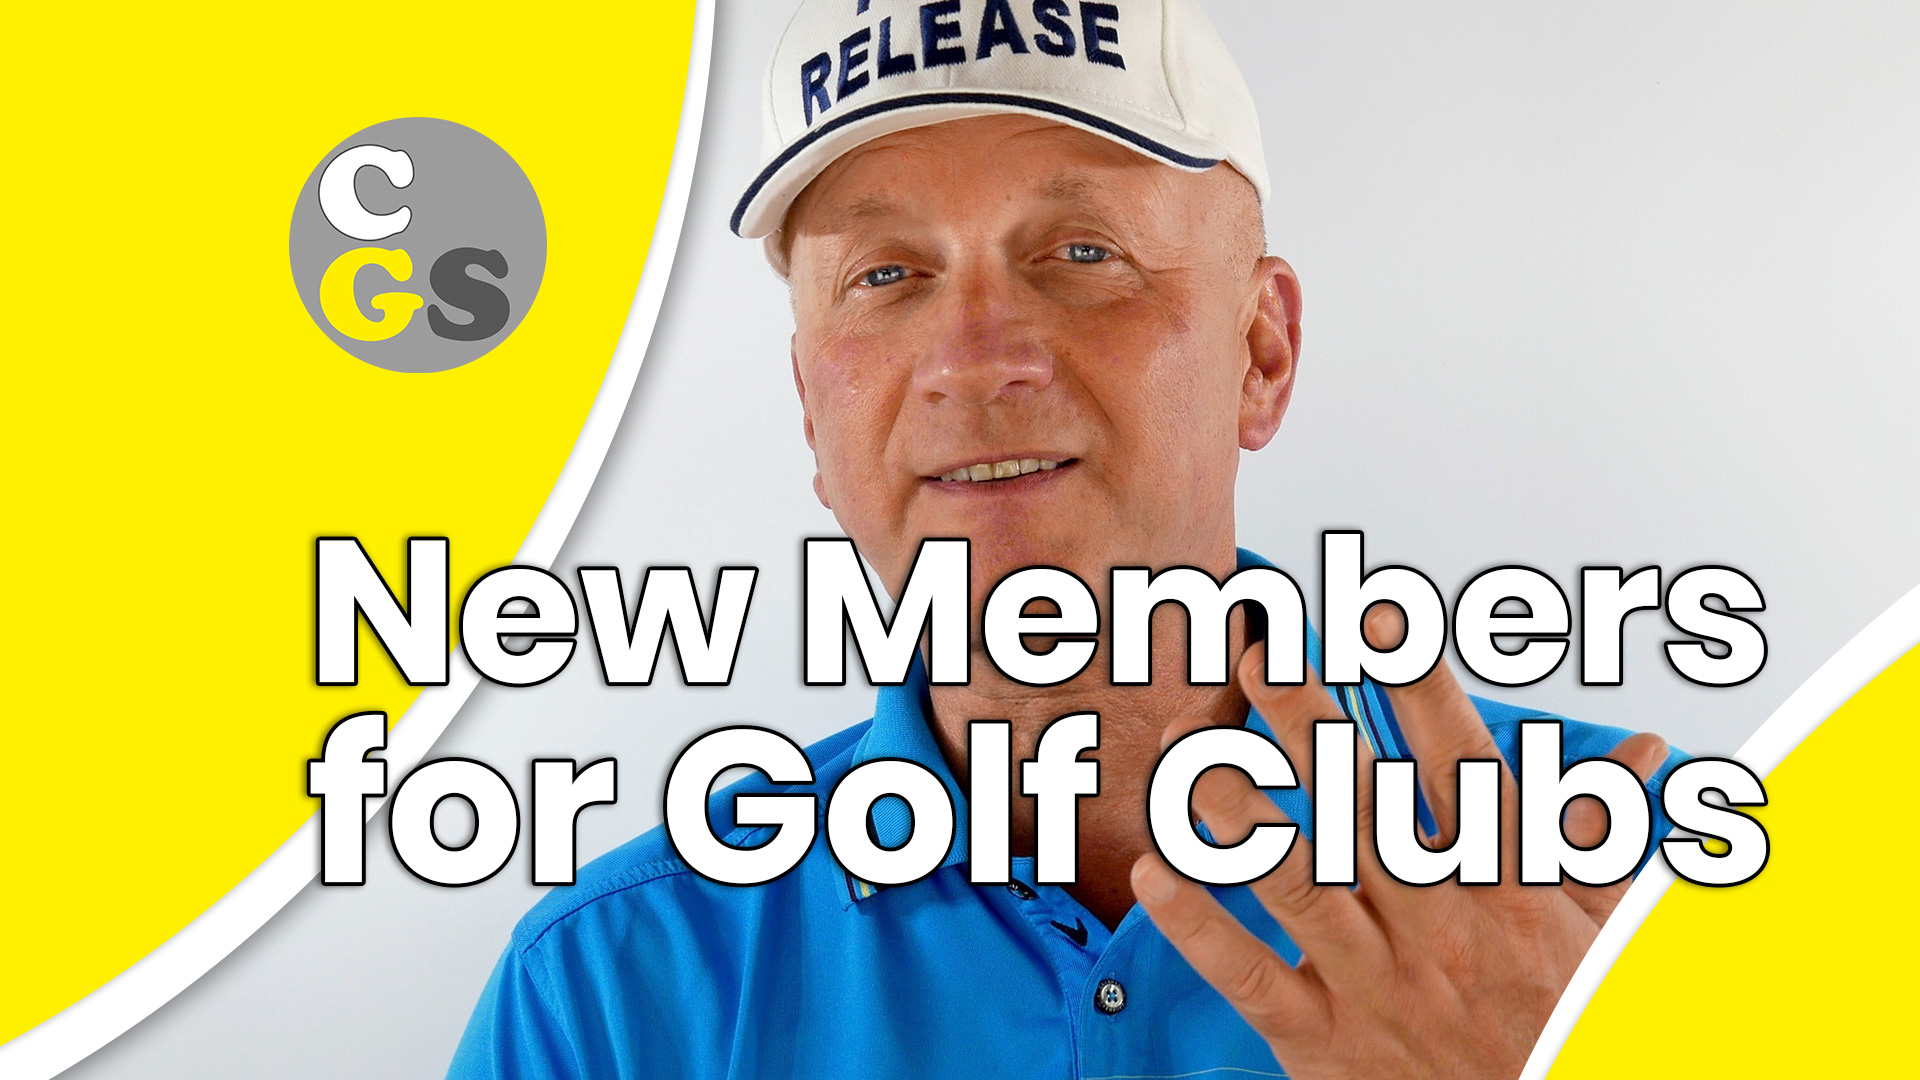 How to Conquer New Members for Your Golf Club